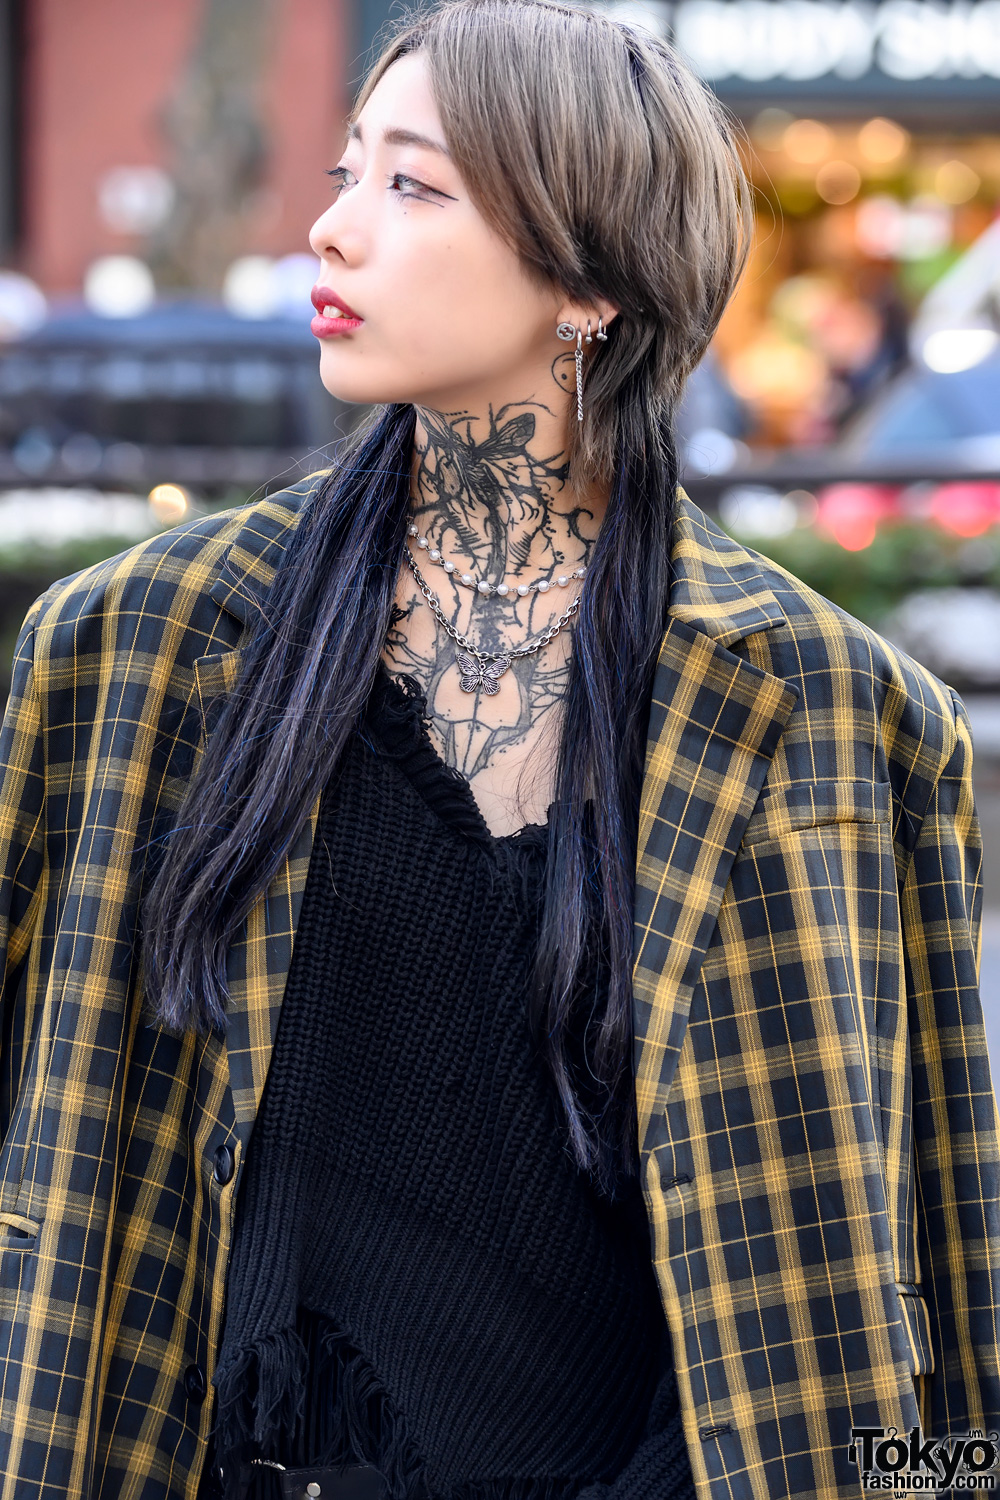 Slave to the Needle has designed a Japanese neck tattoo with flowers as the main motif